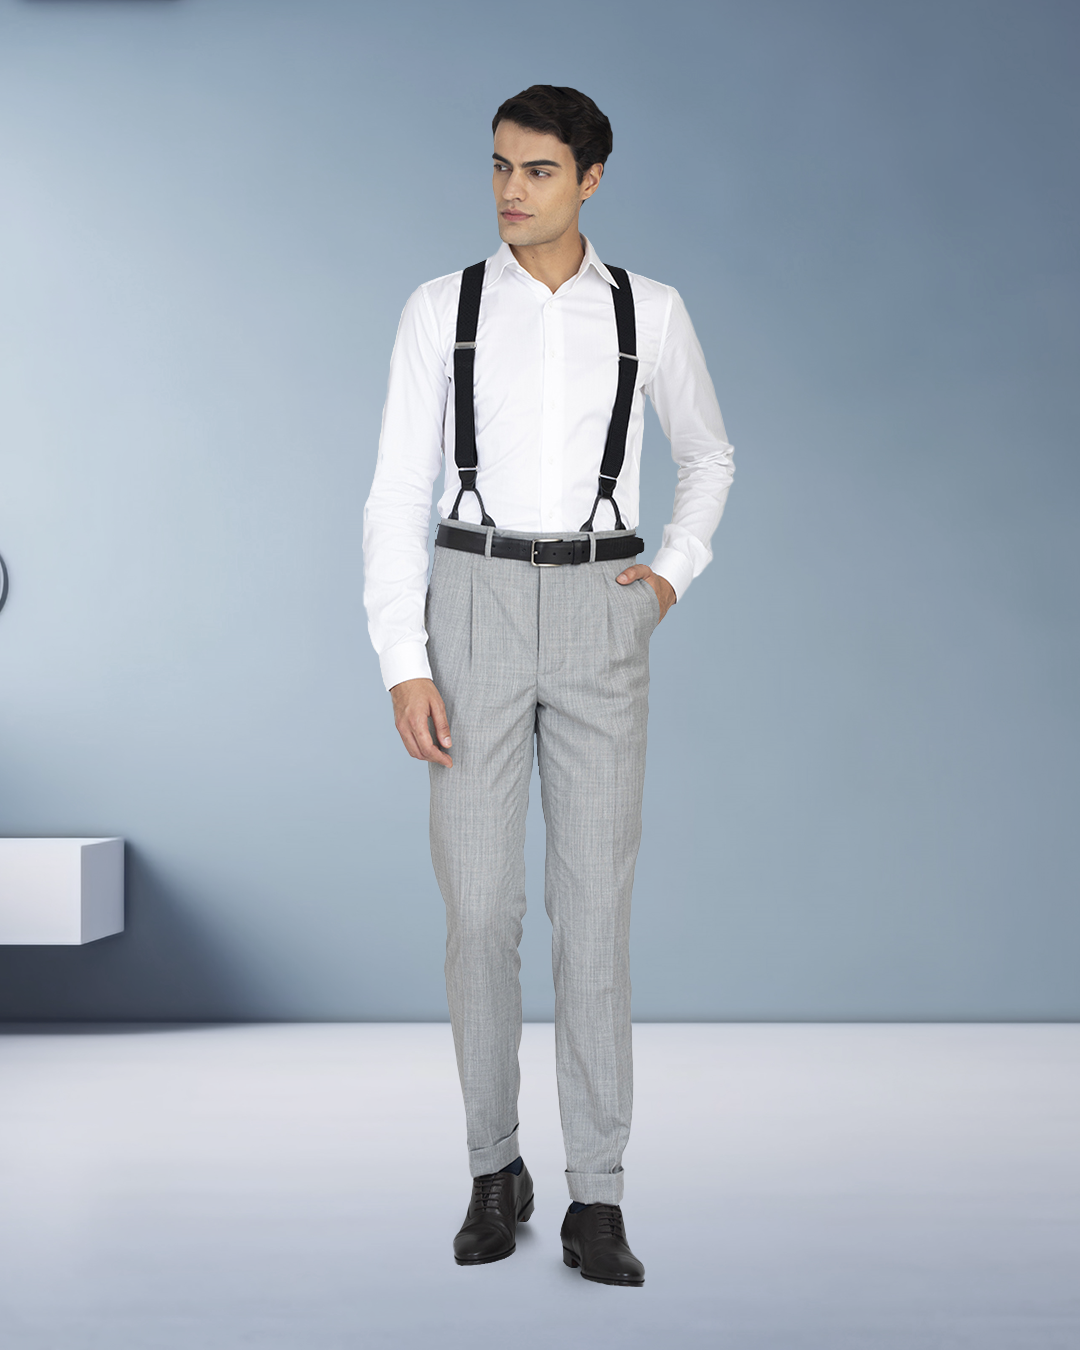 Grey Pants with White Shirt and Suspenders